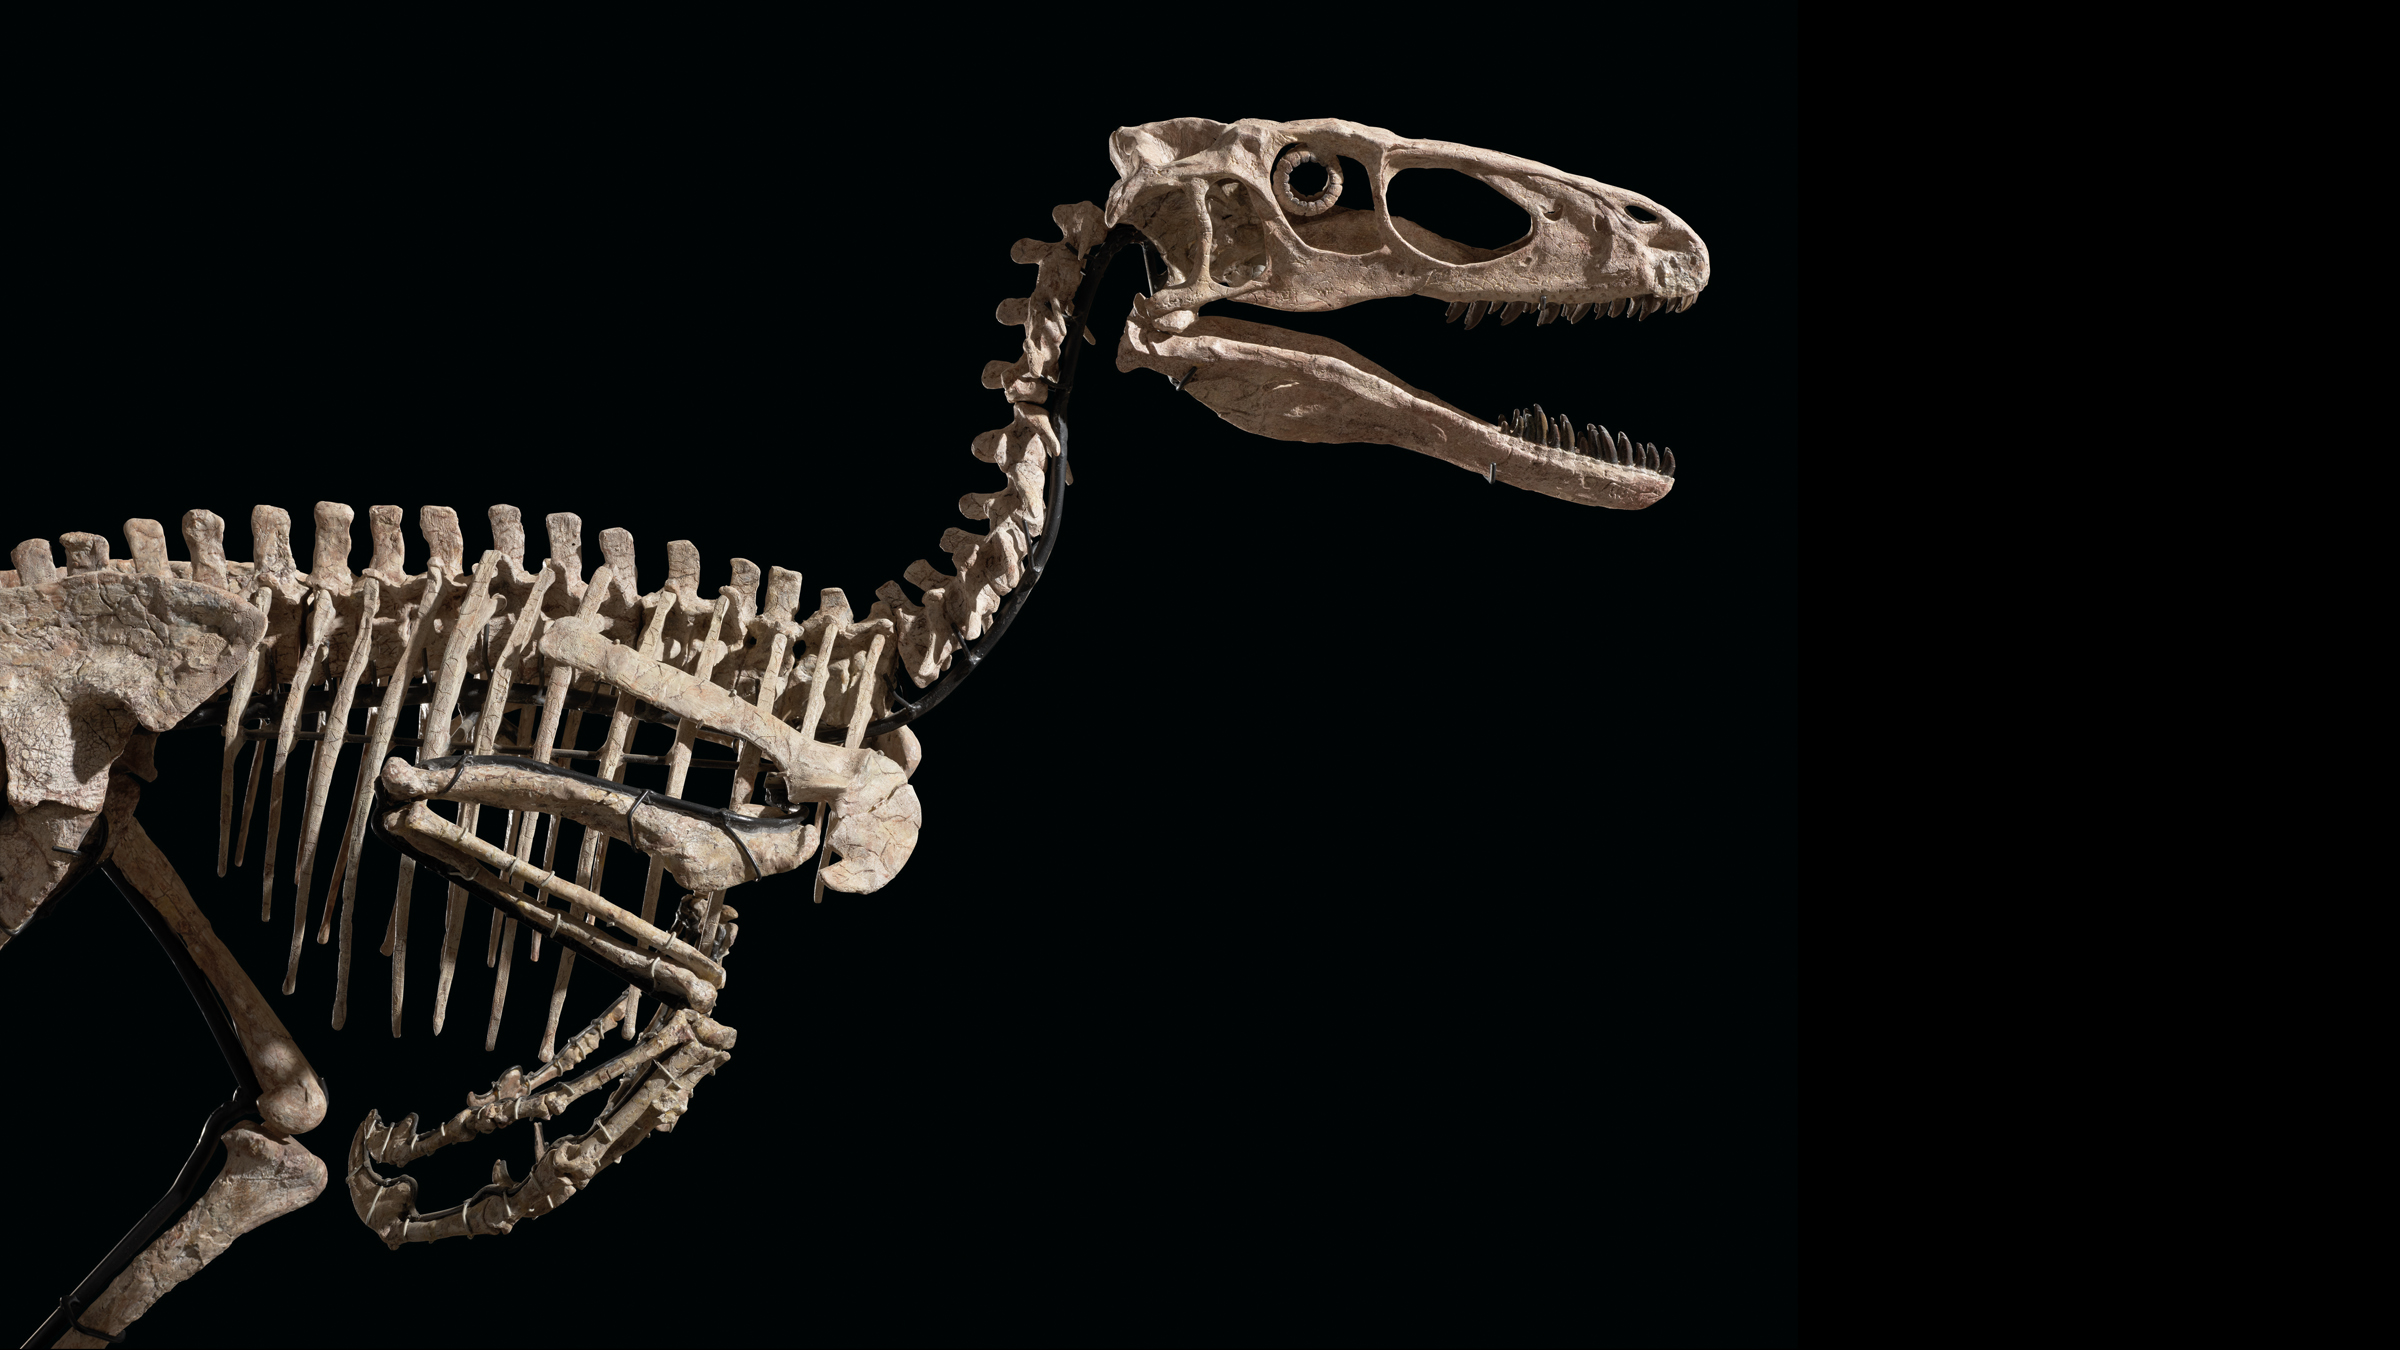 A photo of the skeletal head and shoulders of Deinonychus.